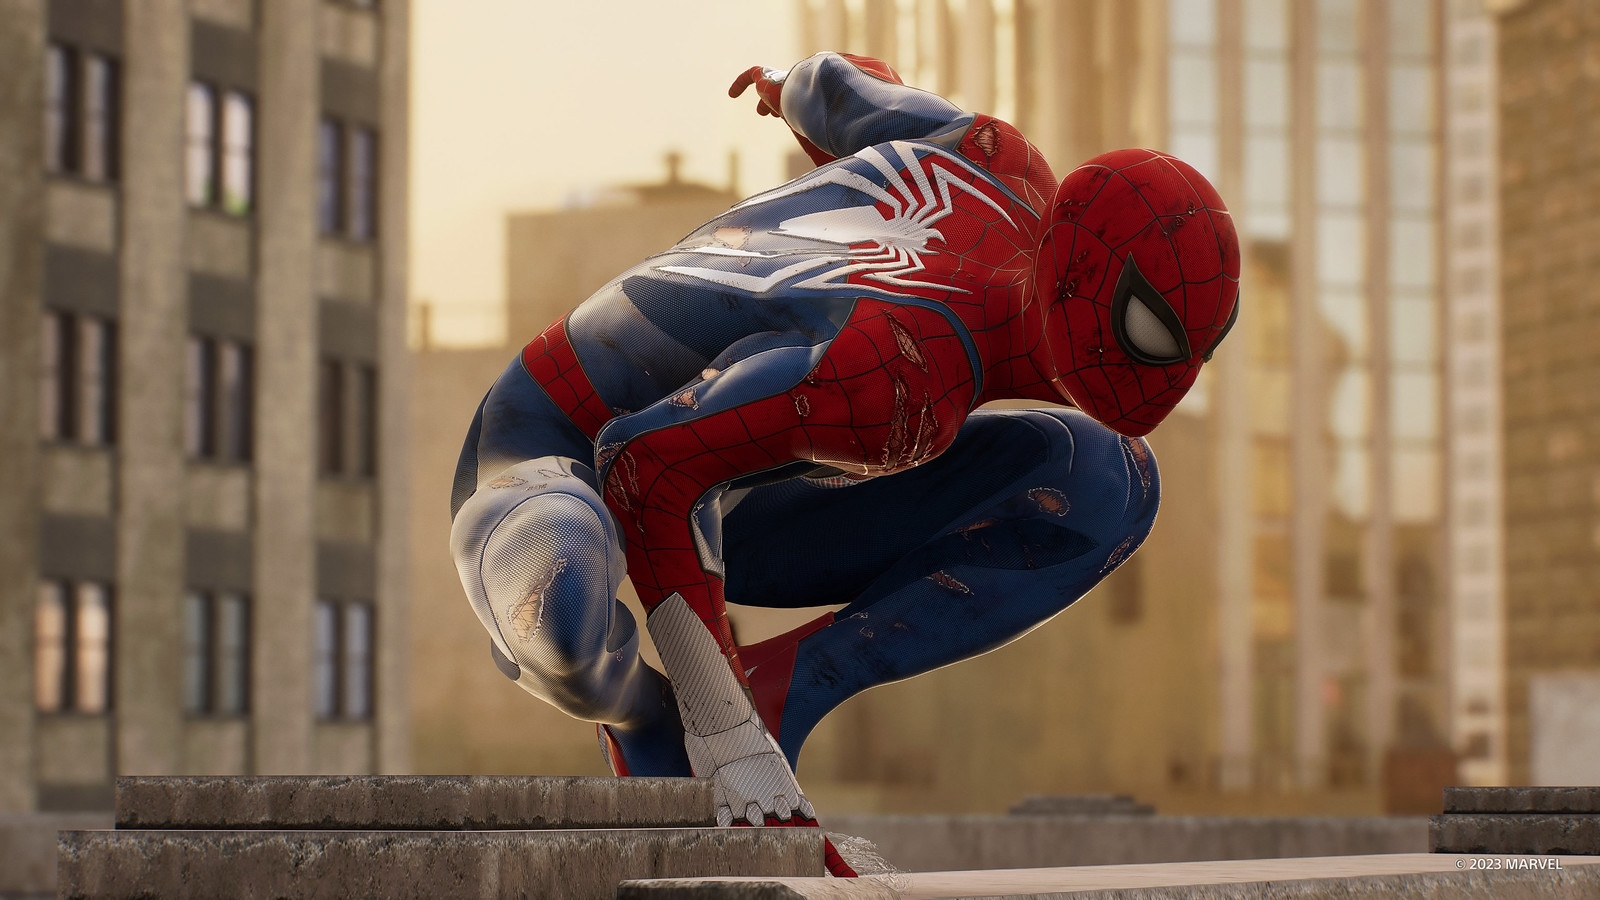 Weekend PS5 game sale from $20: Spider-Man 2, Last of Us Part II, God of War, MLB The Show, and more